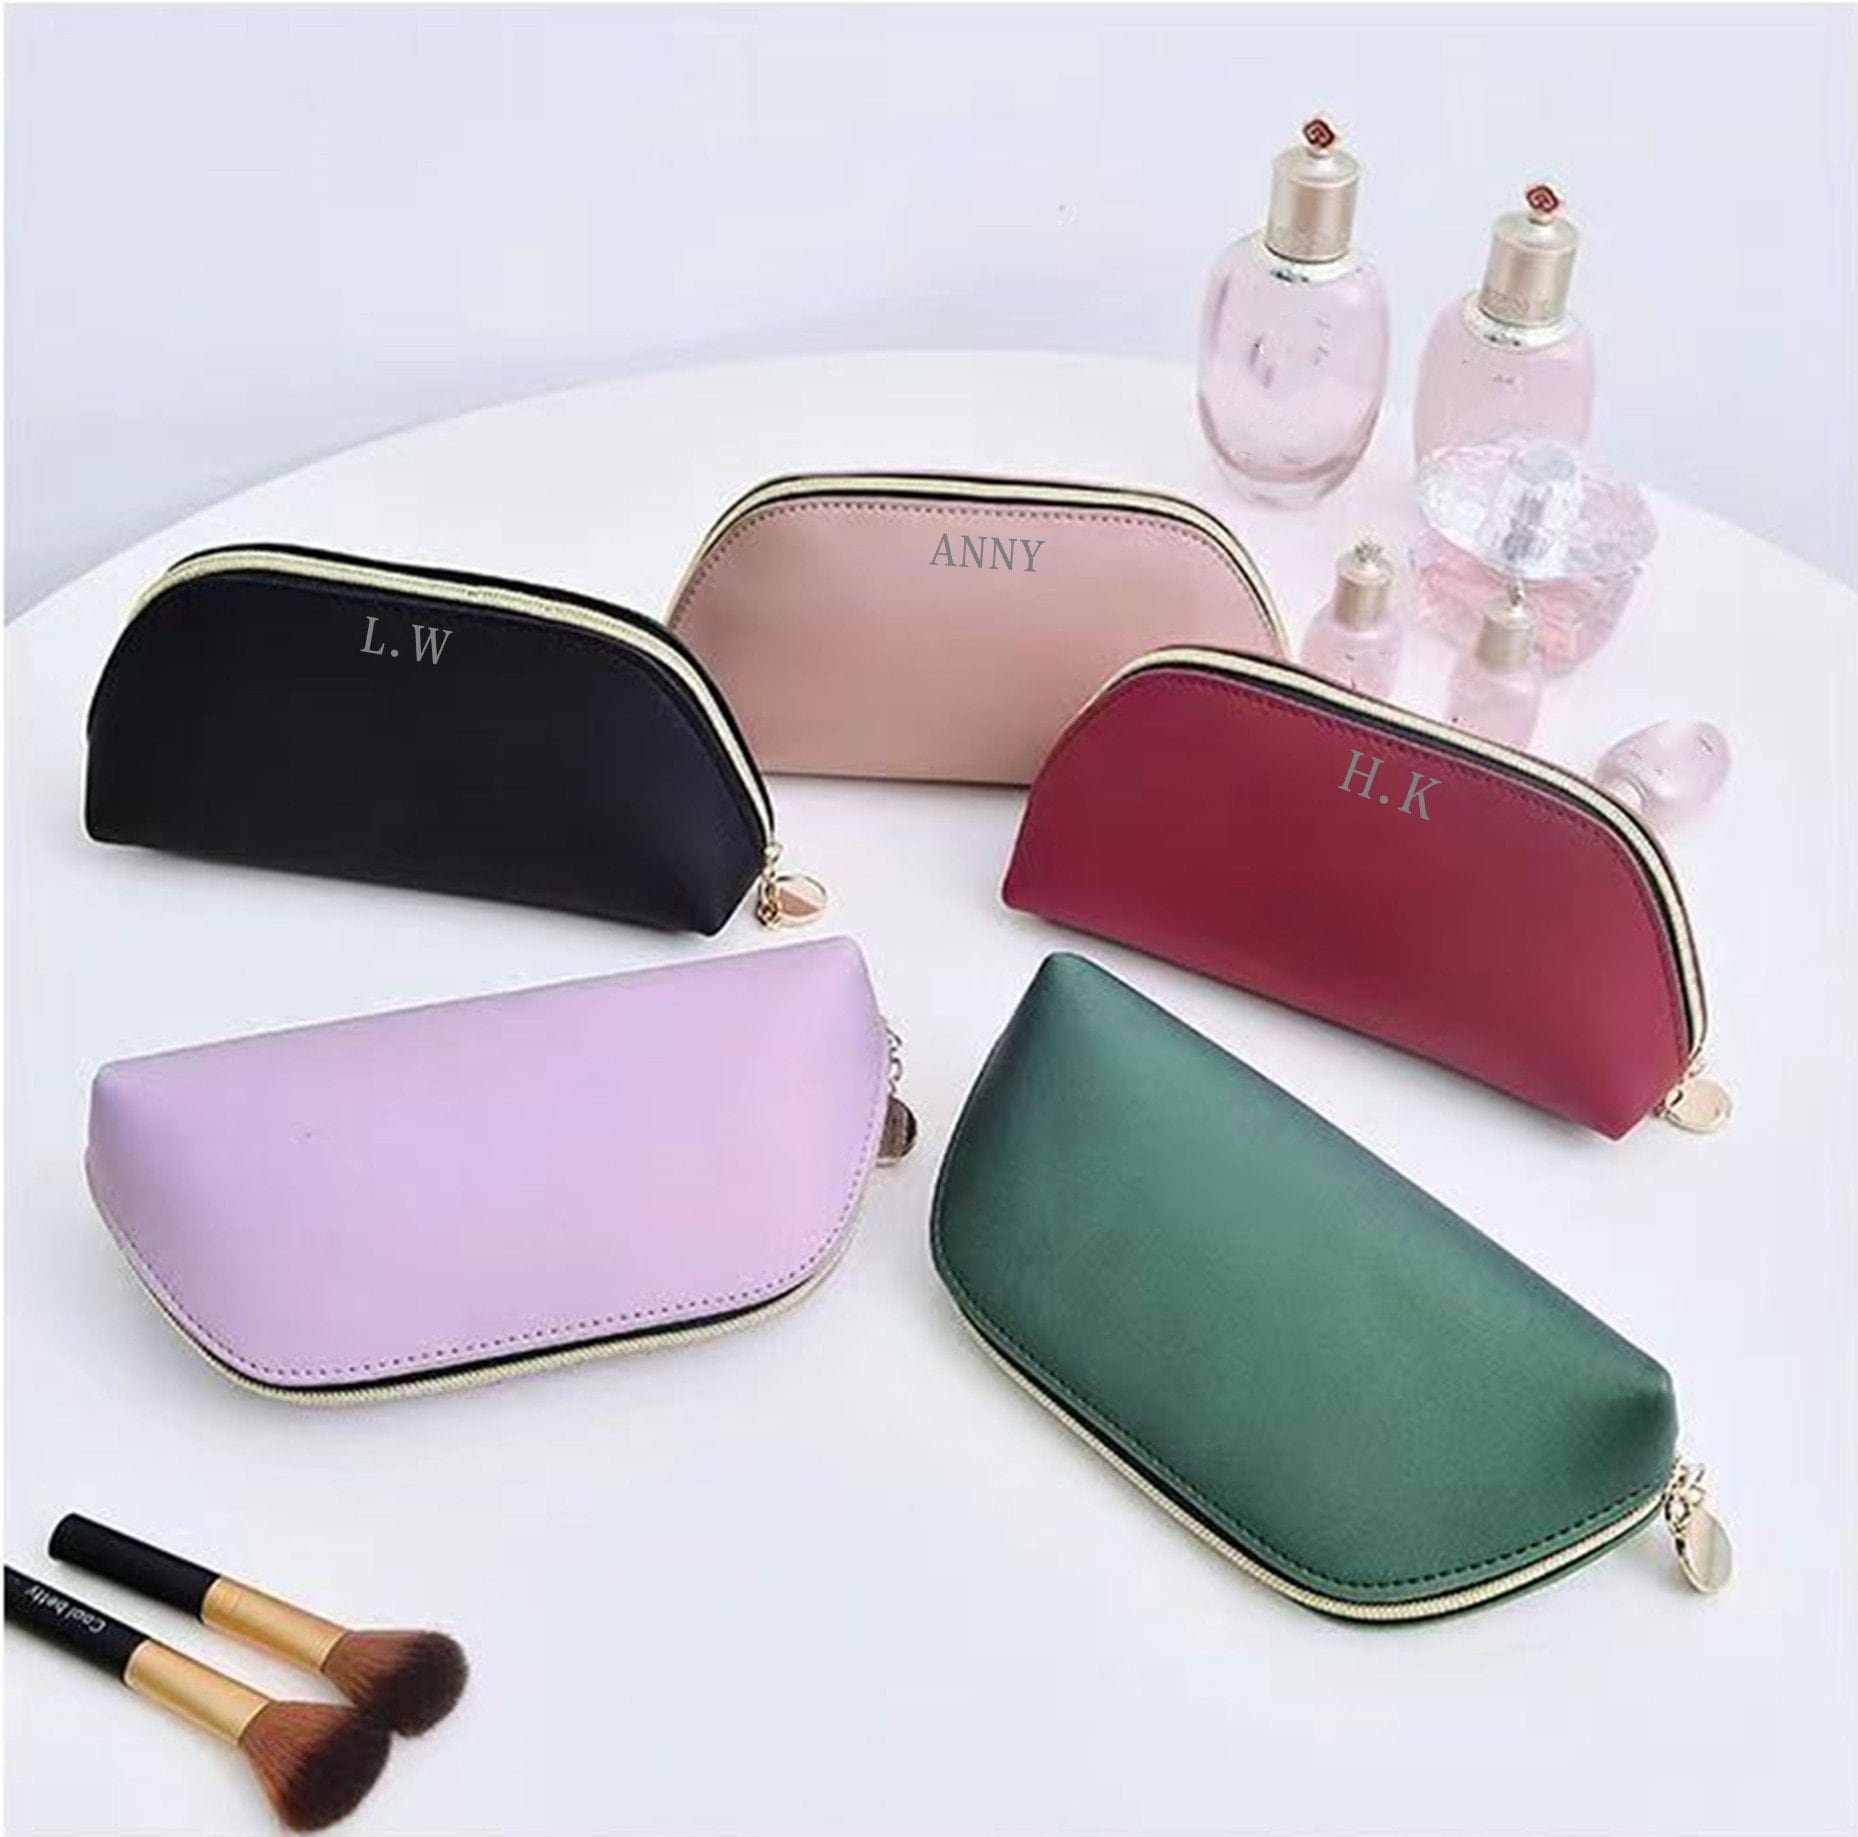 Wholesale Multi Purpose Canvas Cotton Pencil Pouch, Makeup Bag, And Cosmetic  Pouch For DIY Crafts And Everyday Use From Luckies, $0.67